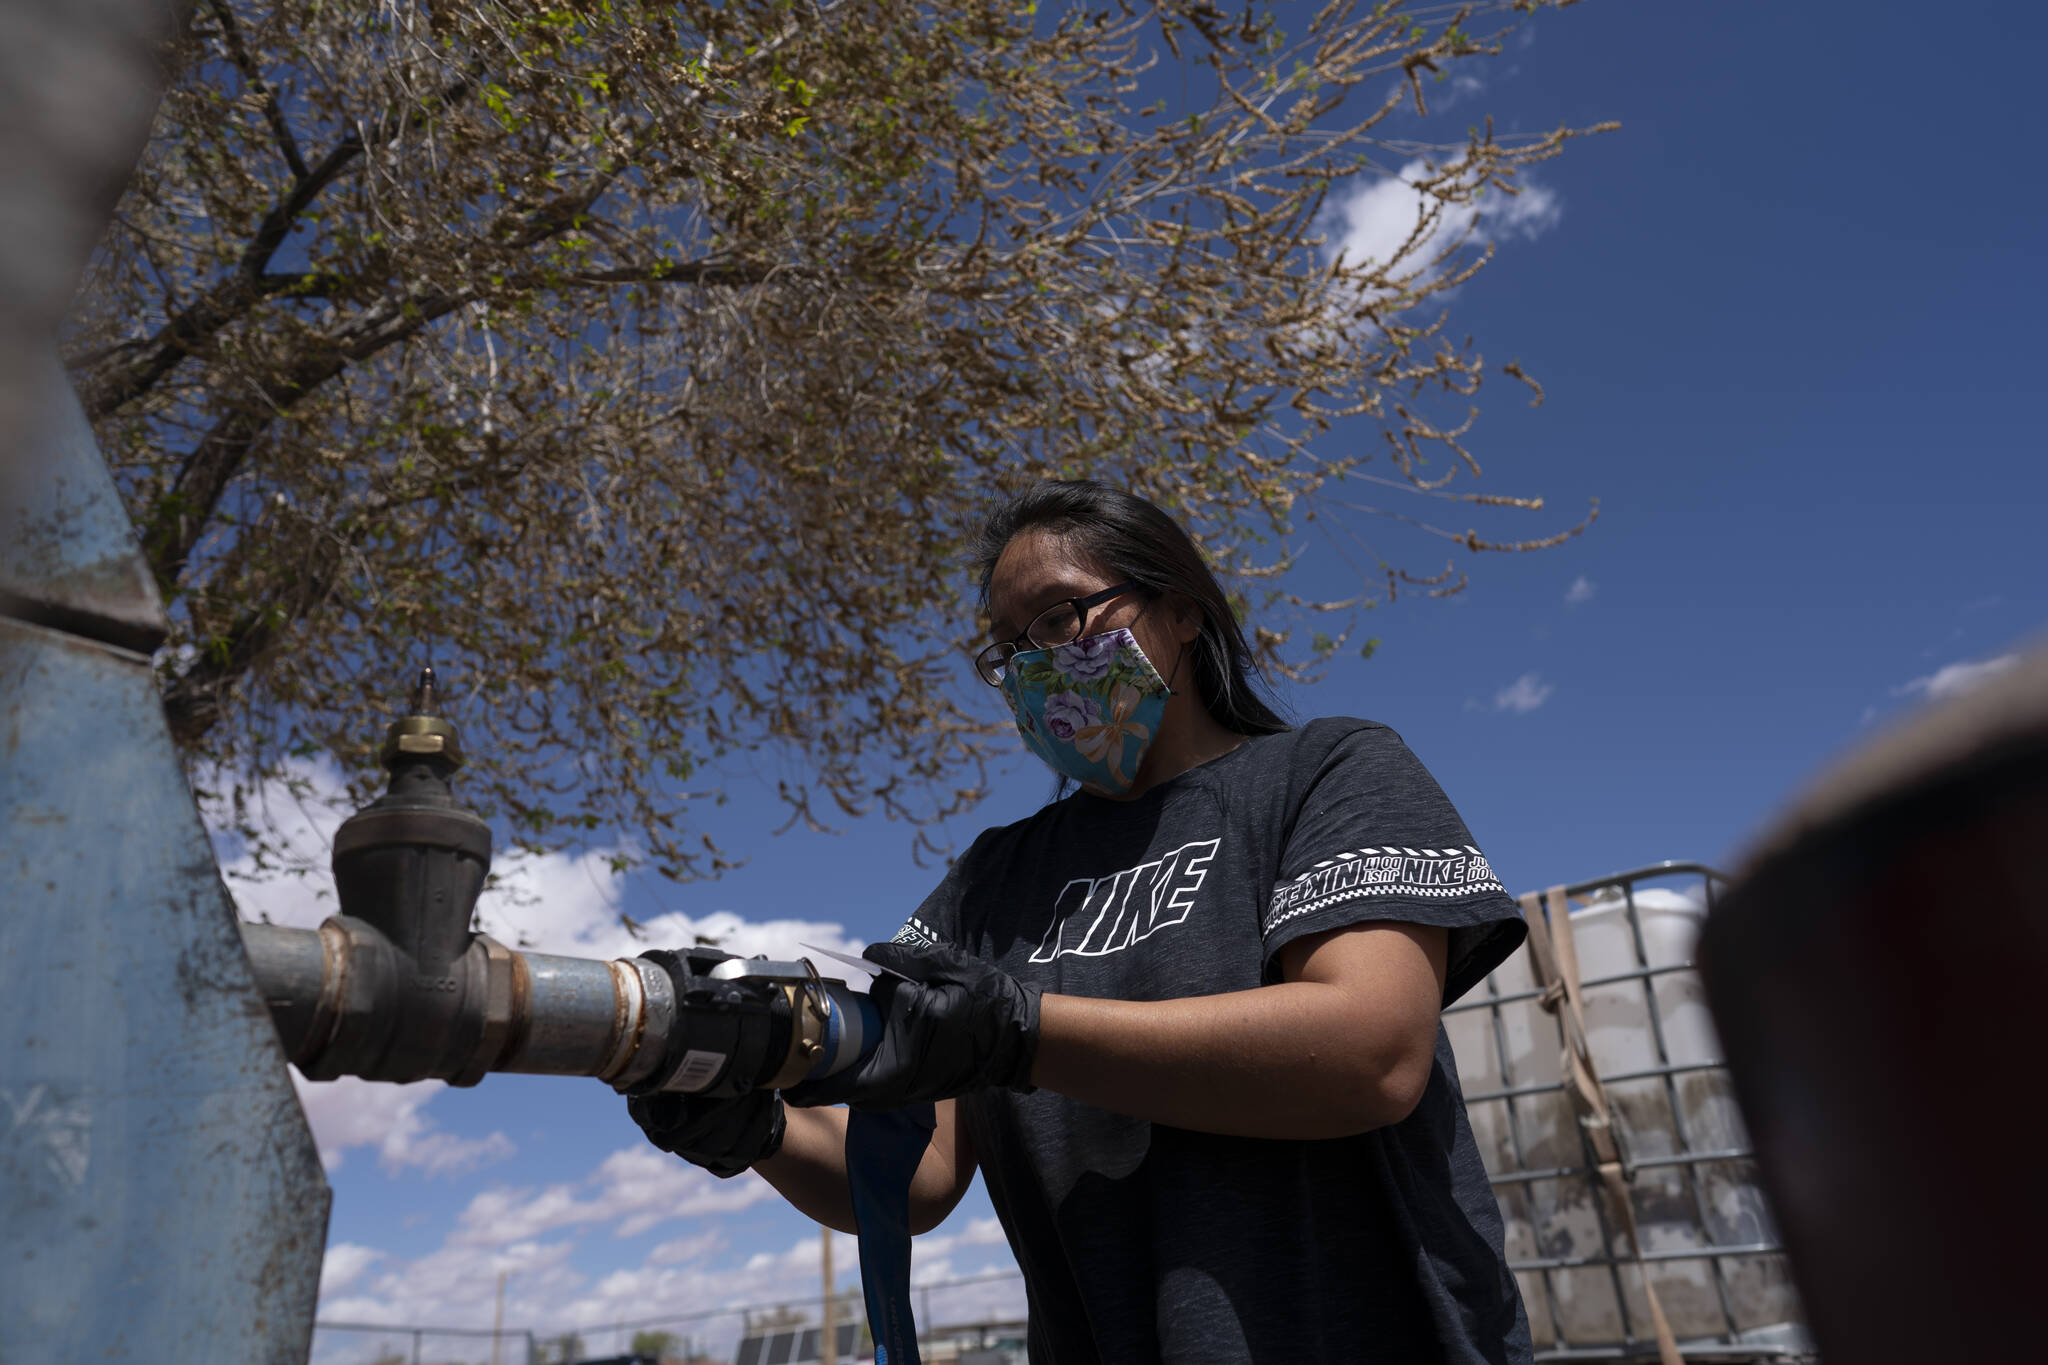 Raynelle Hoskie attaches a hose to a water pump to fill tanks in her truck outside a tribal office on the Navajo reservation in Tuba City, Ariz., on April 20, 2020. A massive infrastructure bill that President Joe Biden signed this week includes billions of dollars to address long-standing issues with water and sanitation on tribal land. (AP Photo/Carolyn Kaster, File)